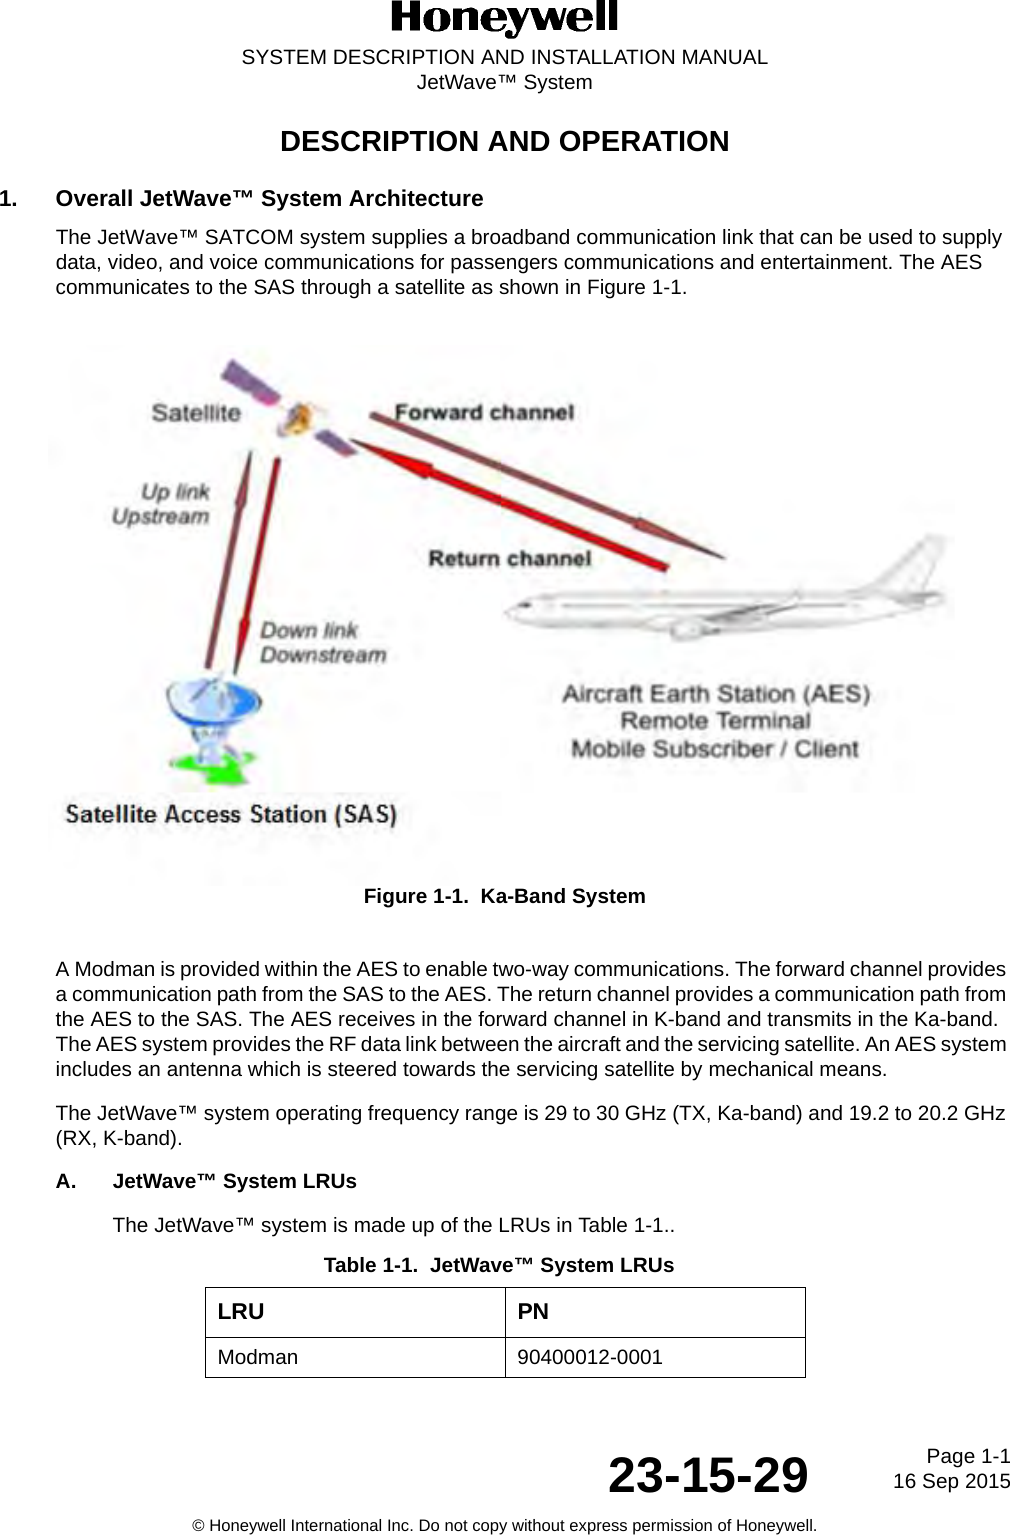 Page 1-116 Sep 201523-15-29SYSTEM DESCRIPTION AND INSTALLATION MANUALJetWave™ System© Honeywell International Inc. Do not copy without express permission of Honeywell.DESCRIPTION AND OPERATION1. Overall JetWave™ System ArchitectureThe JetWave™ SATCOM system supplies a broadband communication link that can be used to supply data, video, and voice communications for passengers communications and entertainment. The AES communicates to the SAS through a satellite as shown in Figure 1-1.Figure 1-1.  Ka-Band SystemA Modman is provided within the AES to enable two-way communications. The forward channel provides a communication path from the SAS to the AES. The return channel provides a communication path from the AES to the SAS. The AES receives in the forward channel in K-band and transmits in the Ka-band. The AES system provides the RF data link between the aircraft and the servicing satellite. An AES system includes an antenna which is steered towards the servicing satellite by mechanical means.The JetWave™ system operating frequency range is 29 to 30 GHz (TX, Ka-band) and 19.2 to 20.2 GHz (RX, K-band). A. JetWave™ System LRUsThe JetWave™ system is made up of the LRUs in Table 1-1..Table 1-1.  JetWave™ System LRUs LRU PNModman 90400012-0001